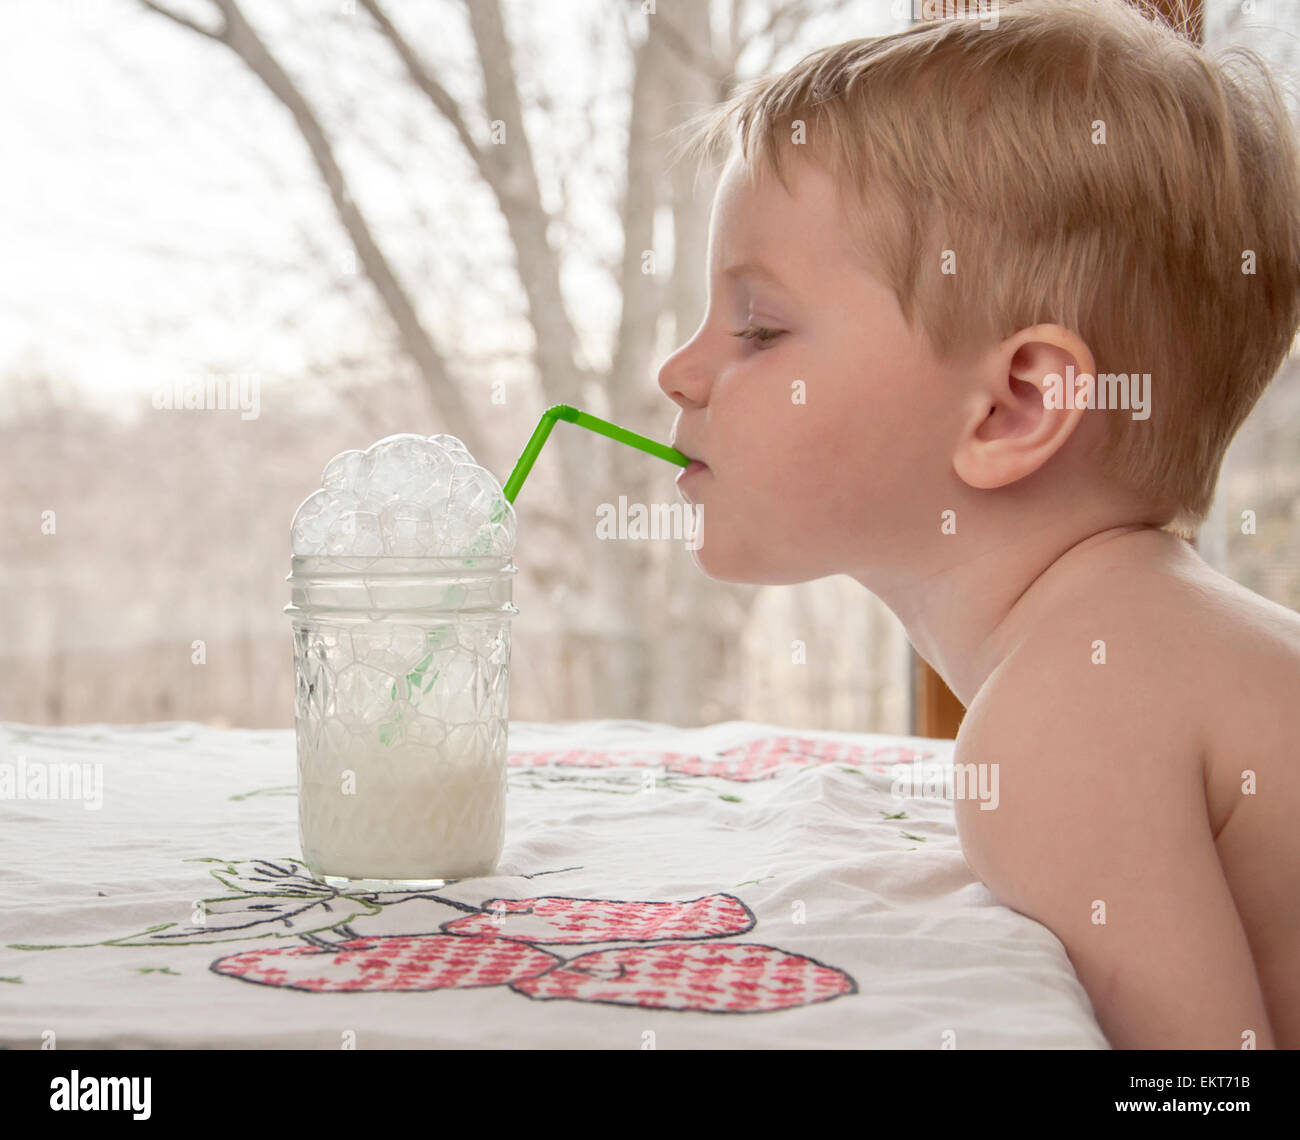 boy blows milk bubbles in his glass Stock Photo